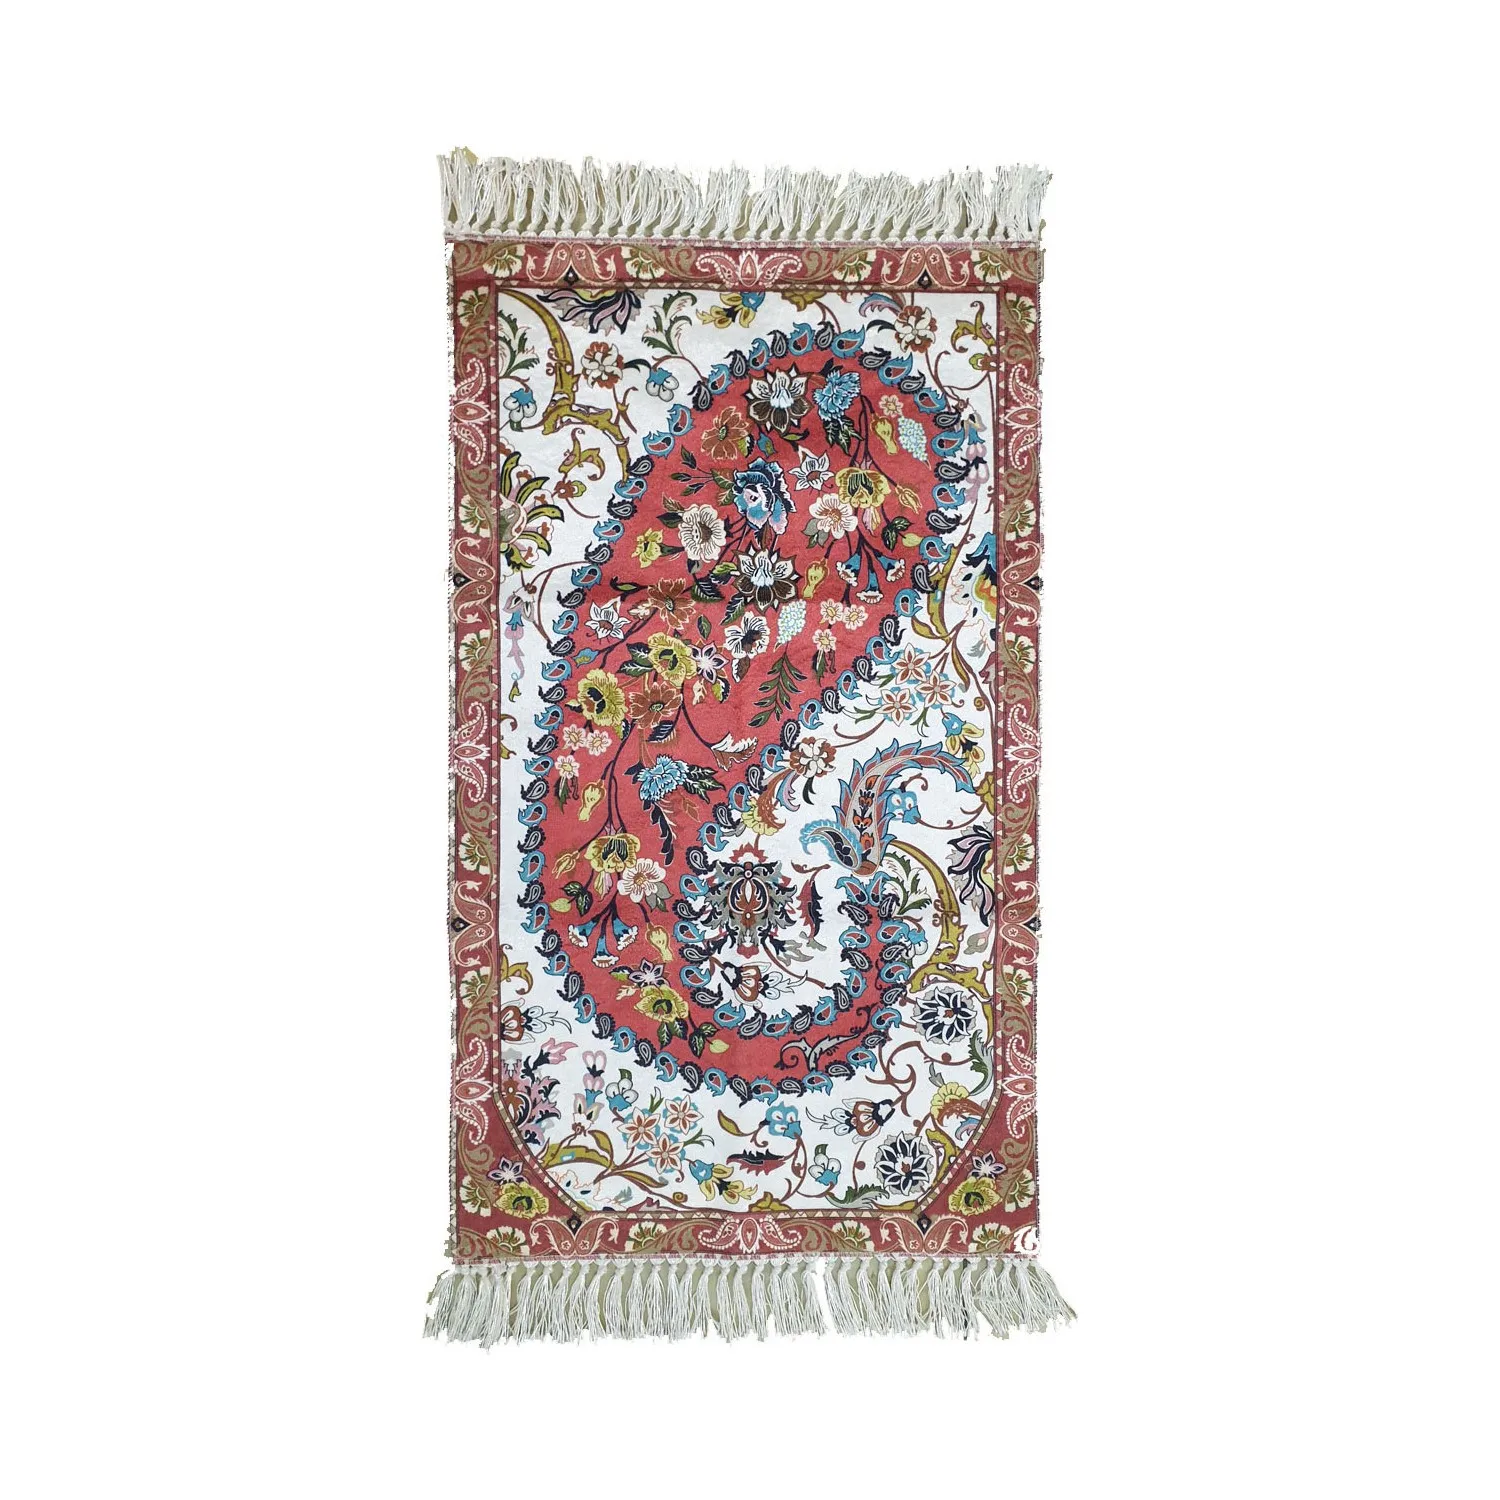 GREAT GIFT Eyteks Luxury Woven Children's Prayer Rug Red MUSLIM PASY TO USE EASY TO USE FREE SHİPPİNG